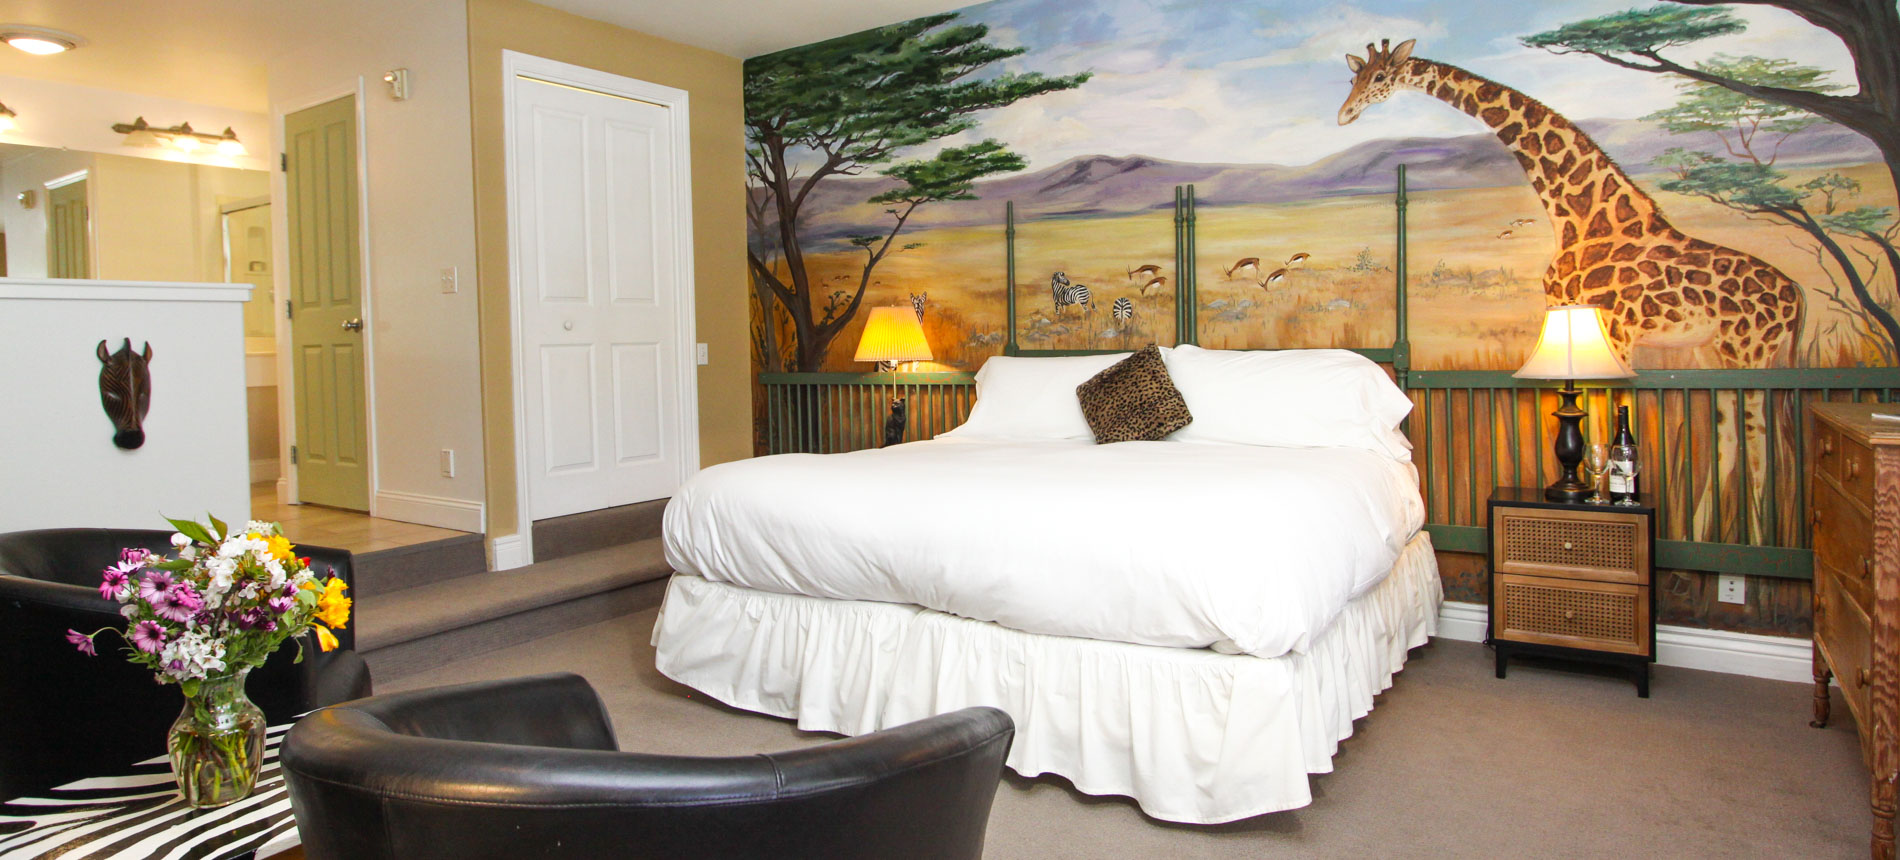 safari room with bed, fireplace, chairs and artwork